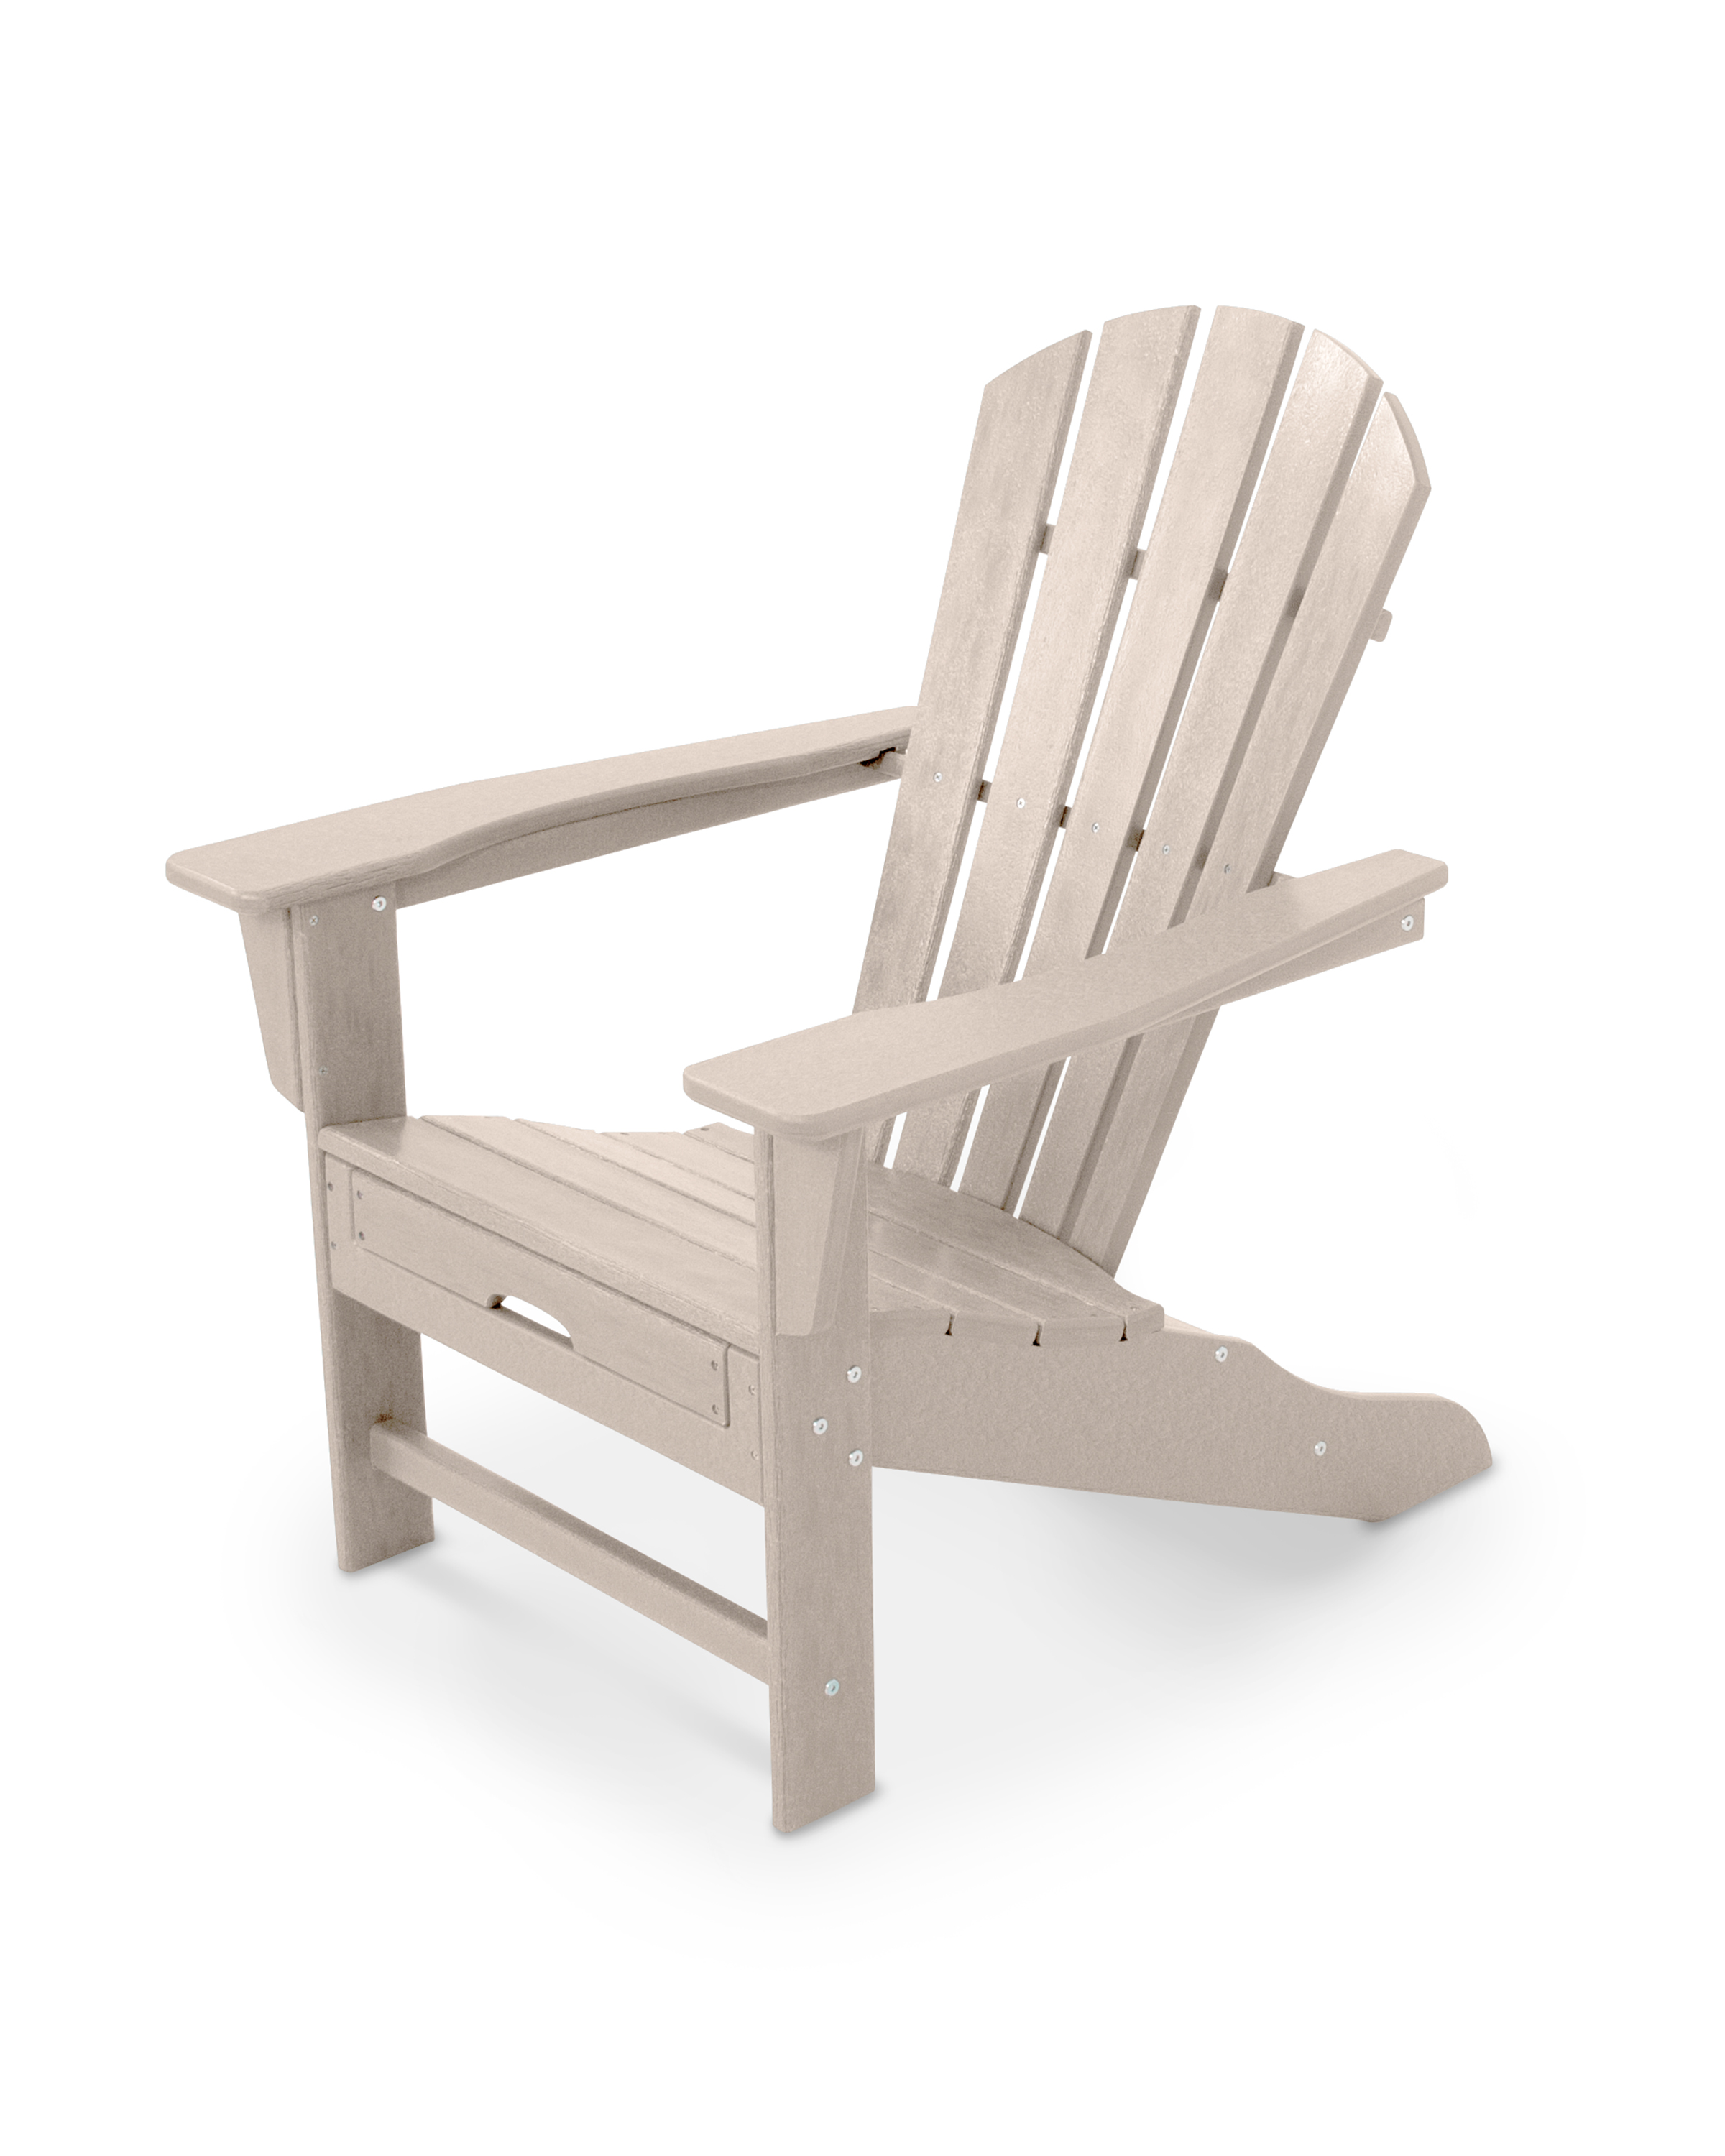 palm coast ultimate adirondack with hideaway ottoman in sand thumbnail image